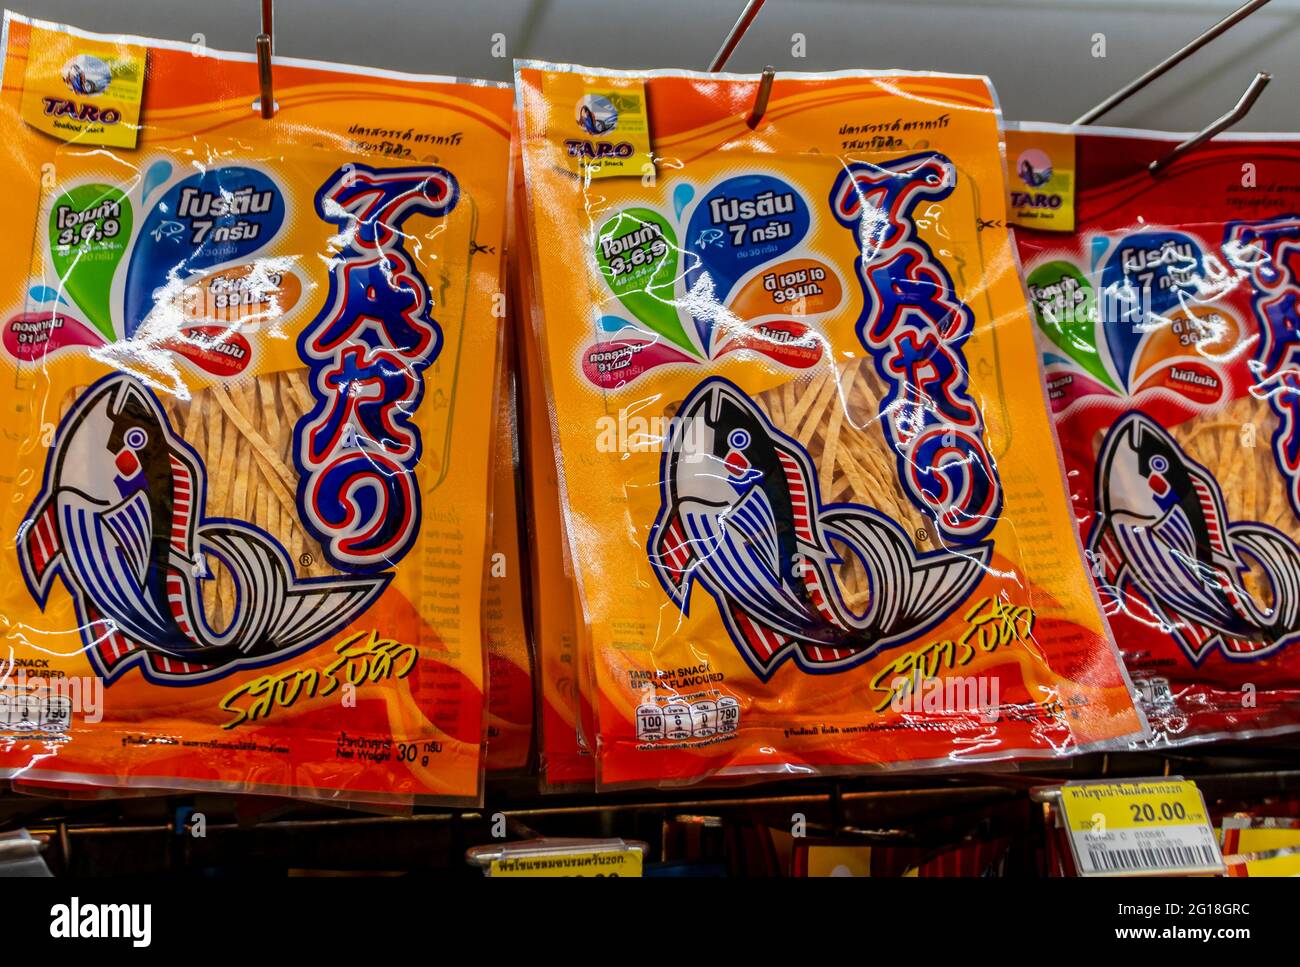 Bangkok Thailand 21. Mai 2018 Thai seaweed fish and instant snack products from the supermarket 7 Eleven in Thailand. Stock Photo